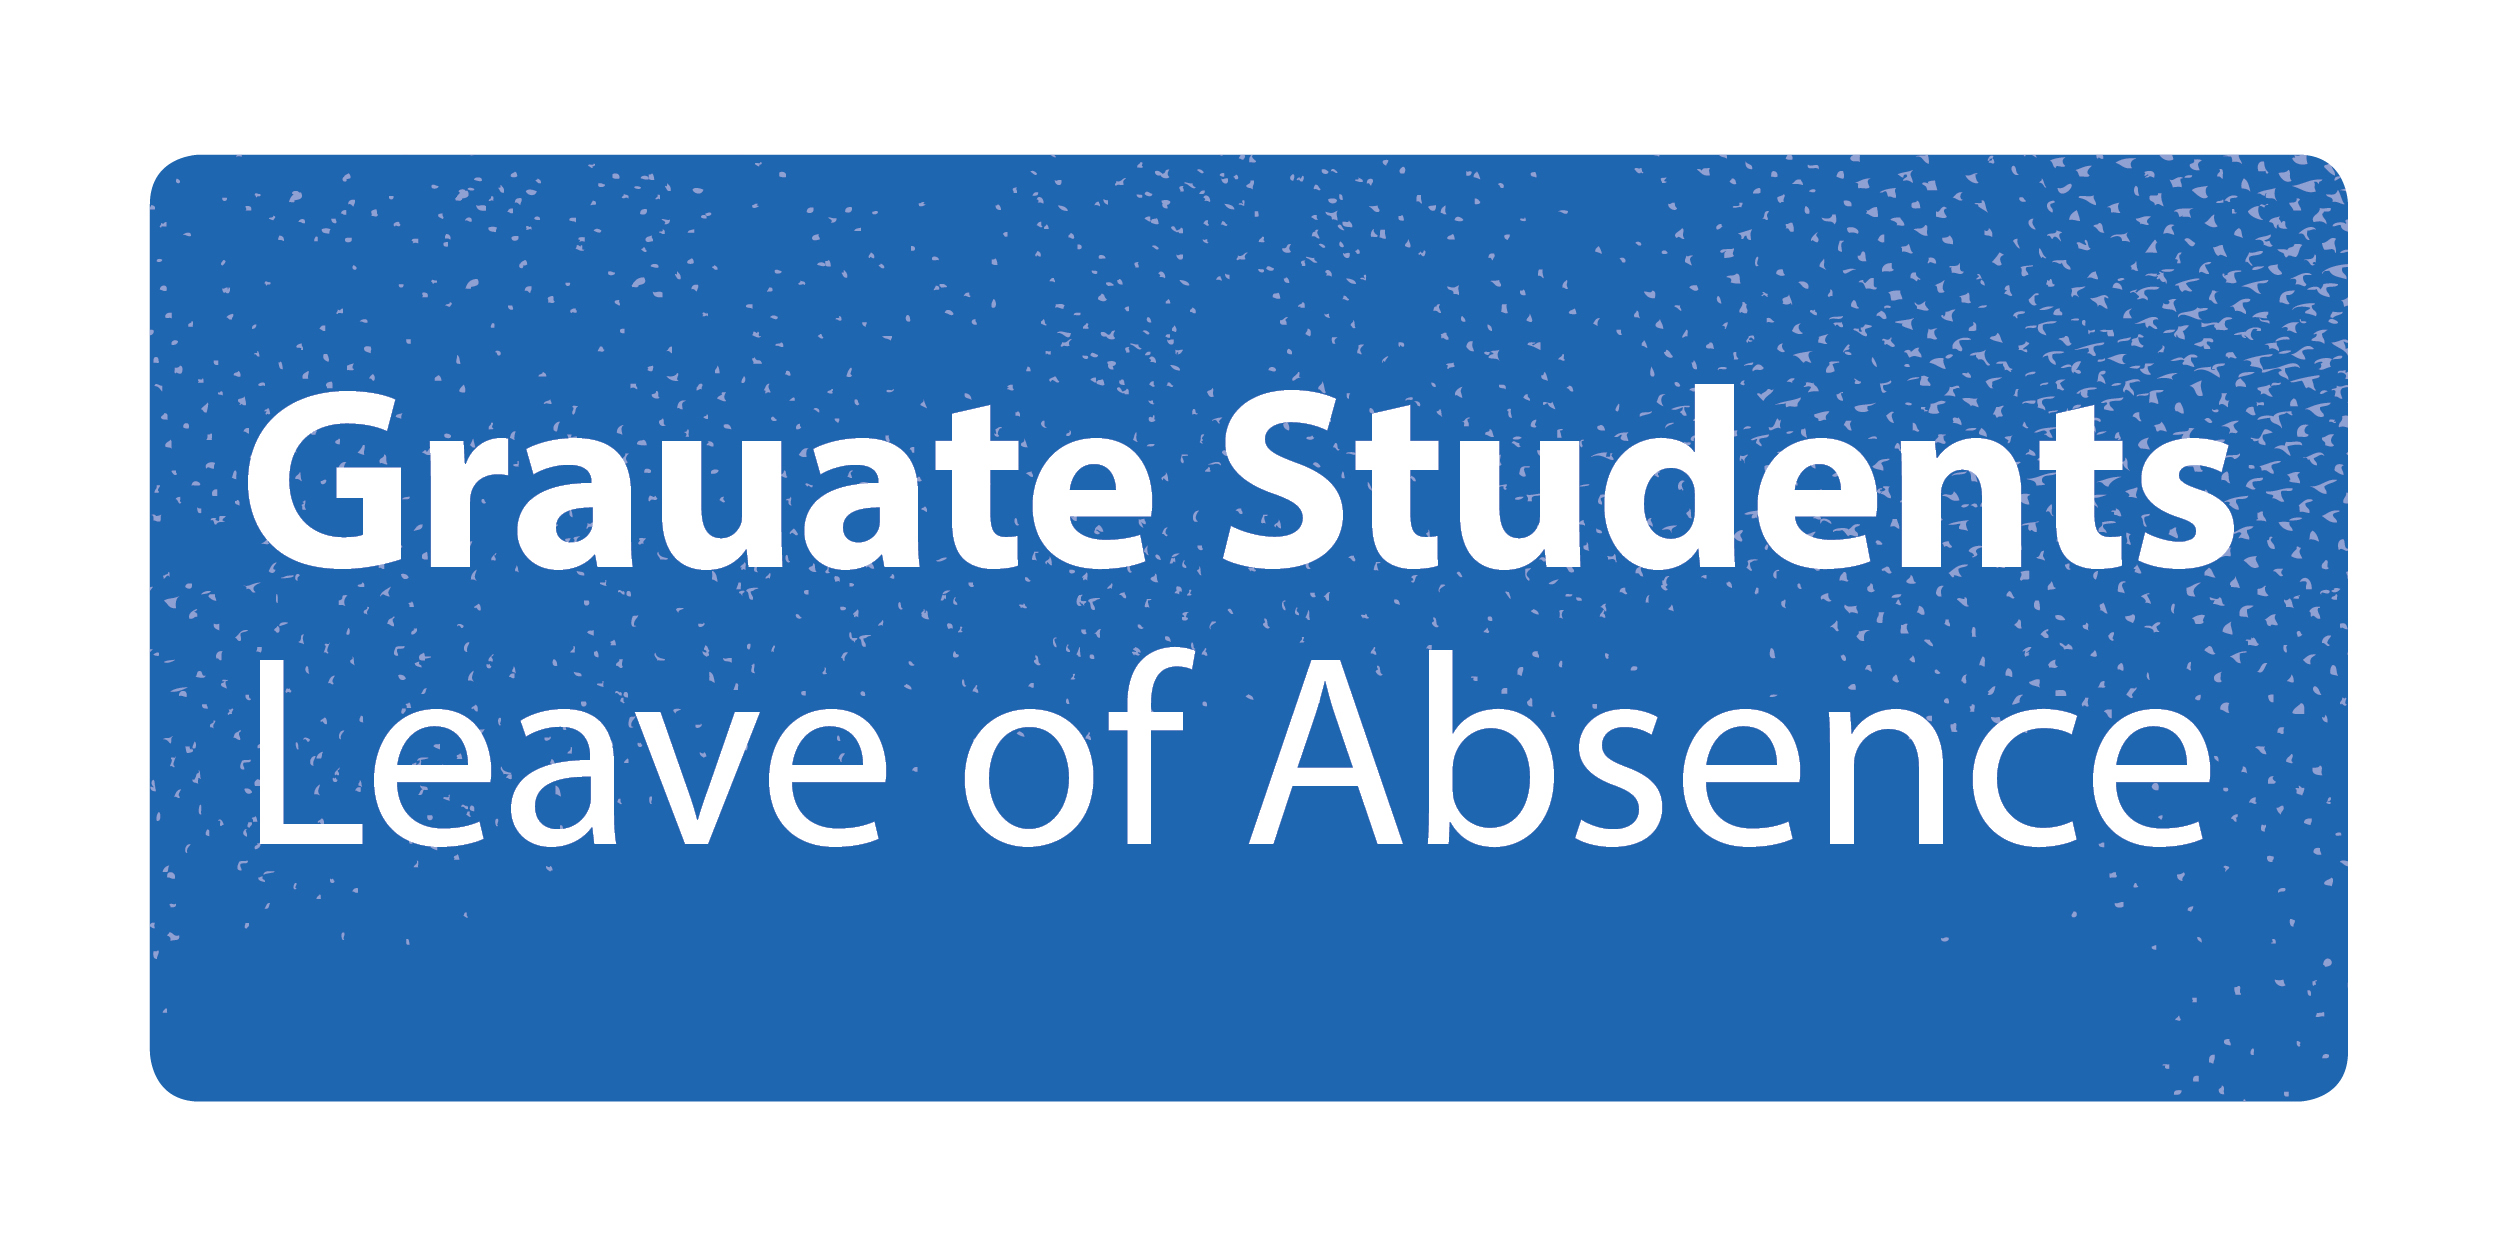 Graduate Students Leave of Absence